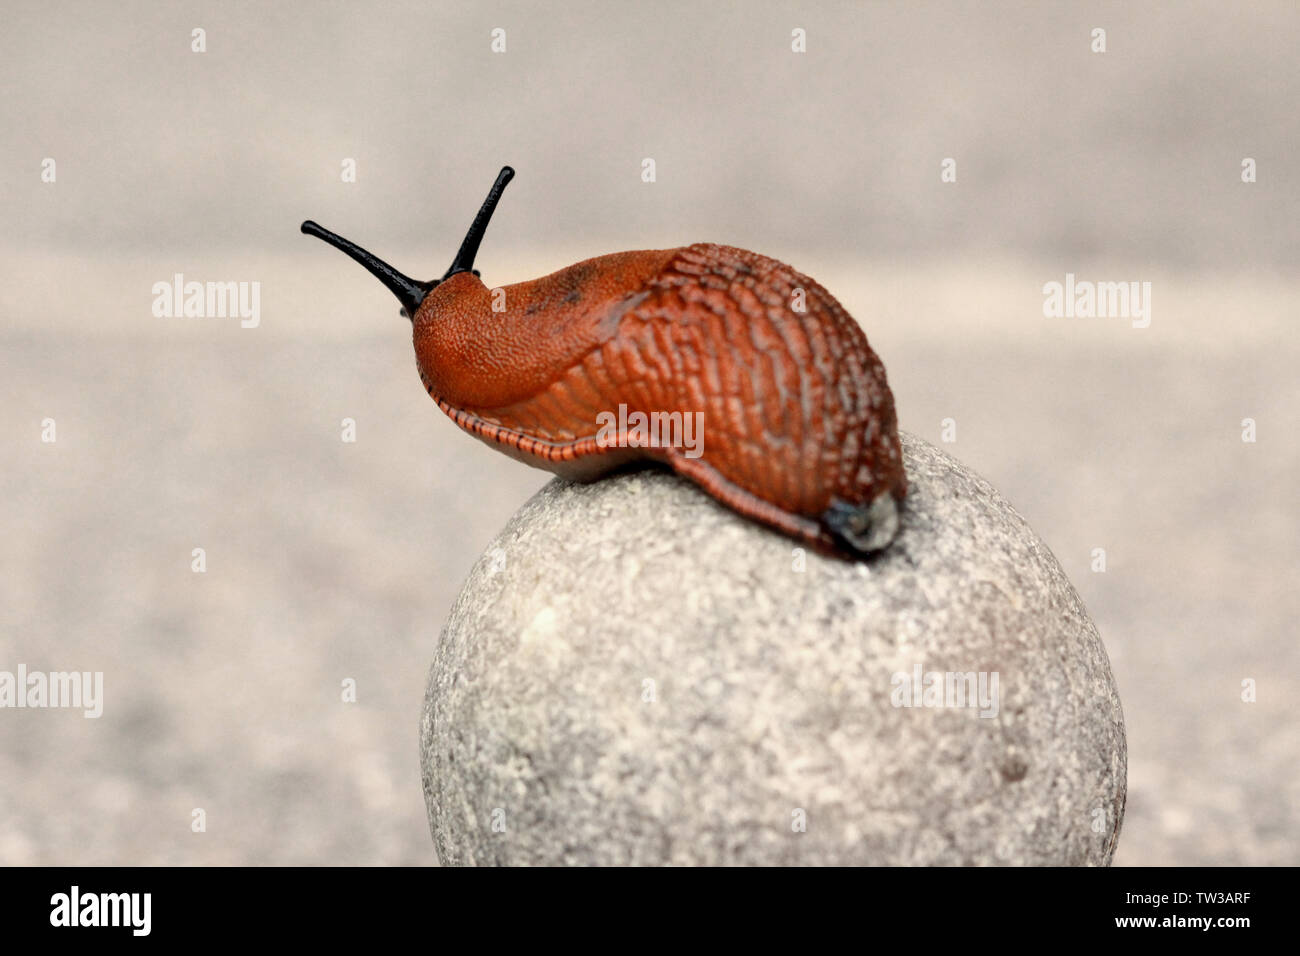 Slowly moving slimy snail in close up Stock Photo